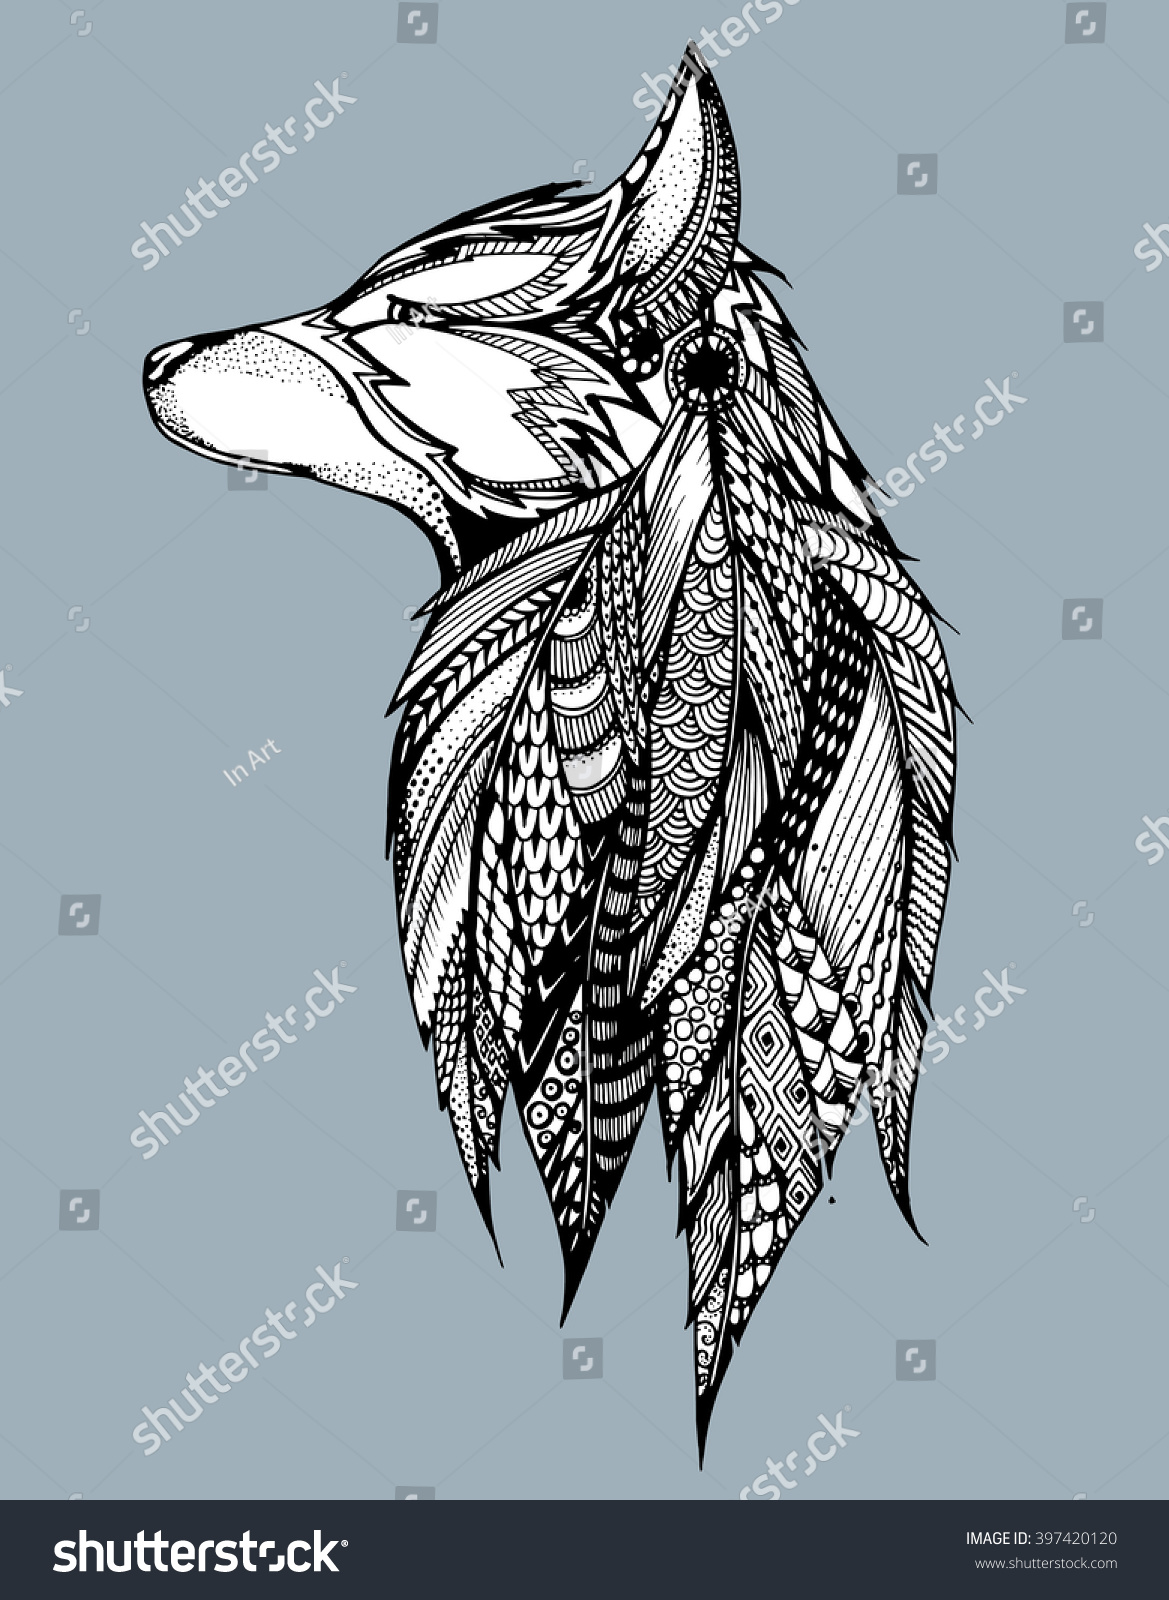 SVG of Profile wolf. Howling wolf. Portrait of a wolf. Stylized dog. Head. Line art. Black and white drawing by hand. Zentangl. svg